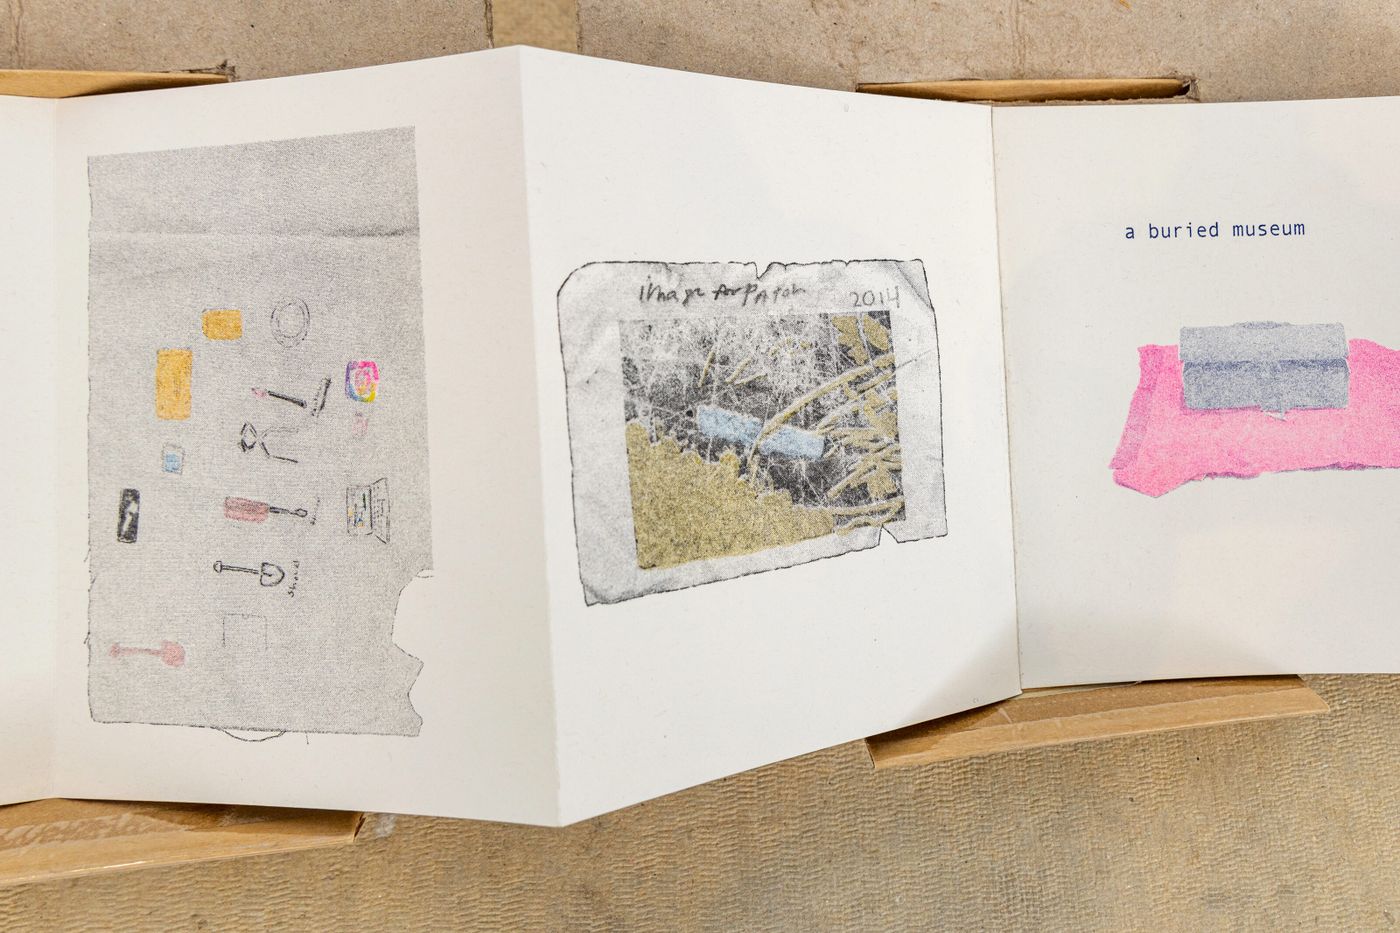 Buried Museum Book (detail), 2022. Riso print; each page 6.5 x 5.5 in. Photo: Meghan Olson.